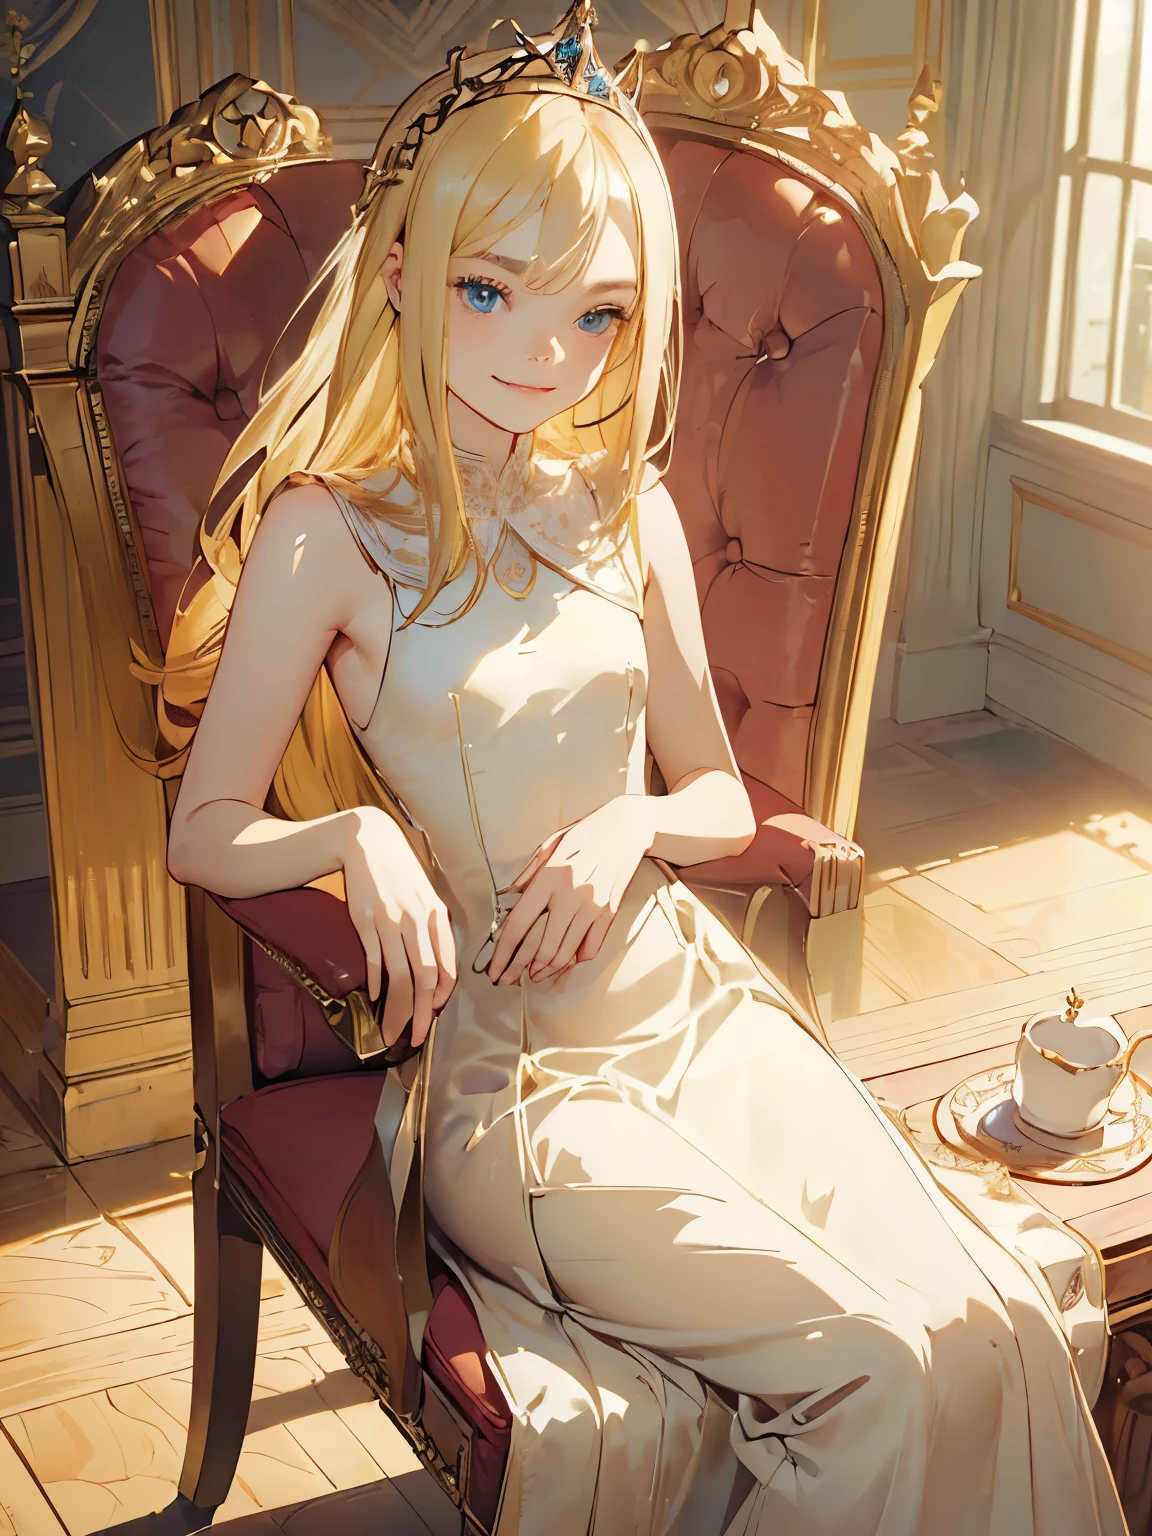 ((( masterpiece ))) ((( background : in s castle : elegant room))) ((( character : Elle Fanning : long elegant blonde hair : small breast : princess dress : fit body :  : sitting on a chair : innocent smile )))